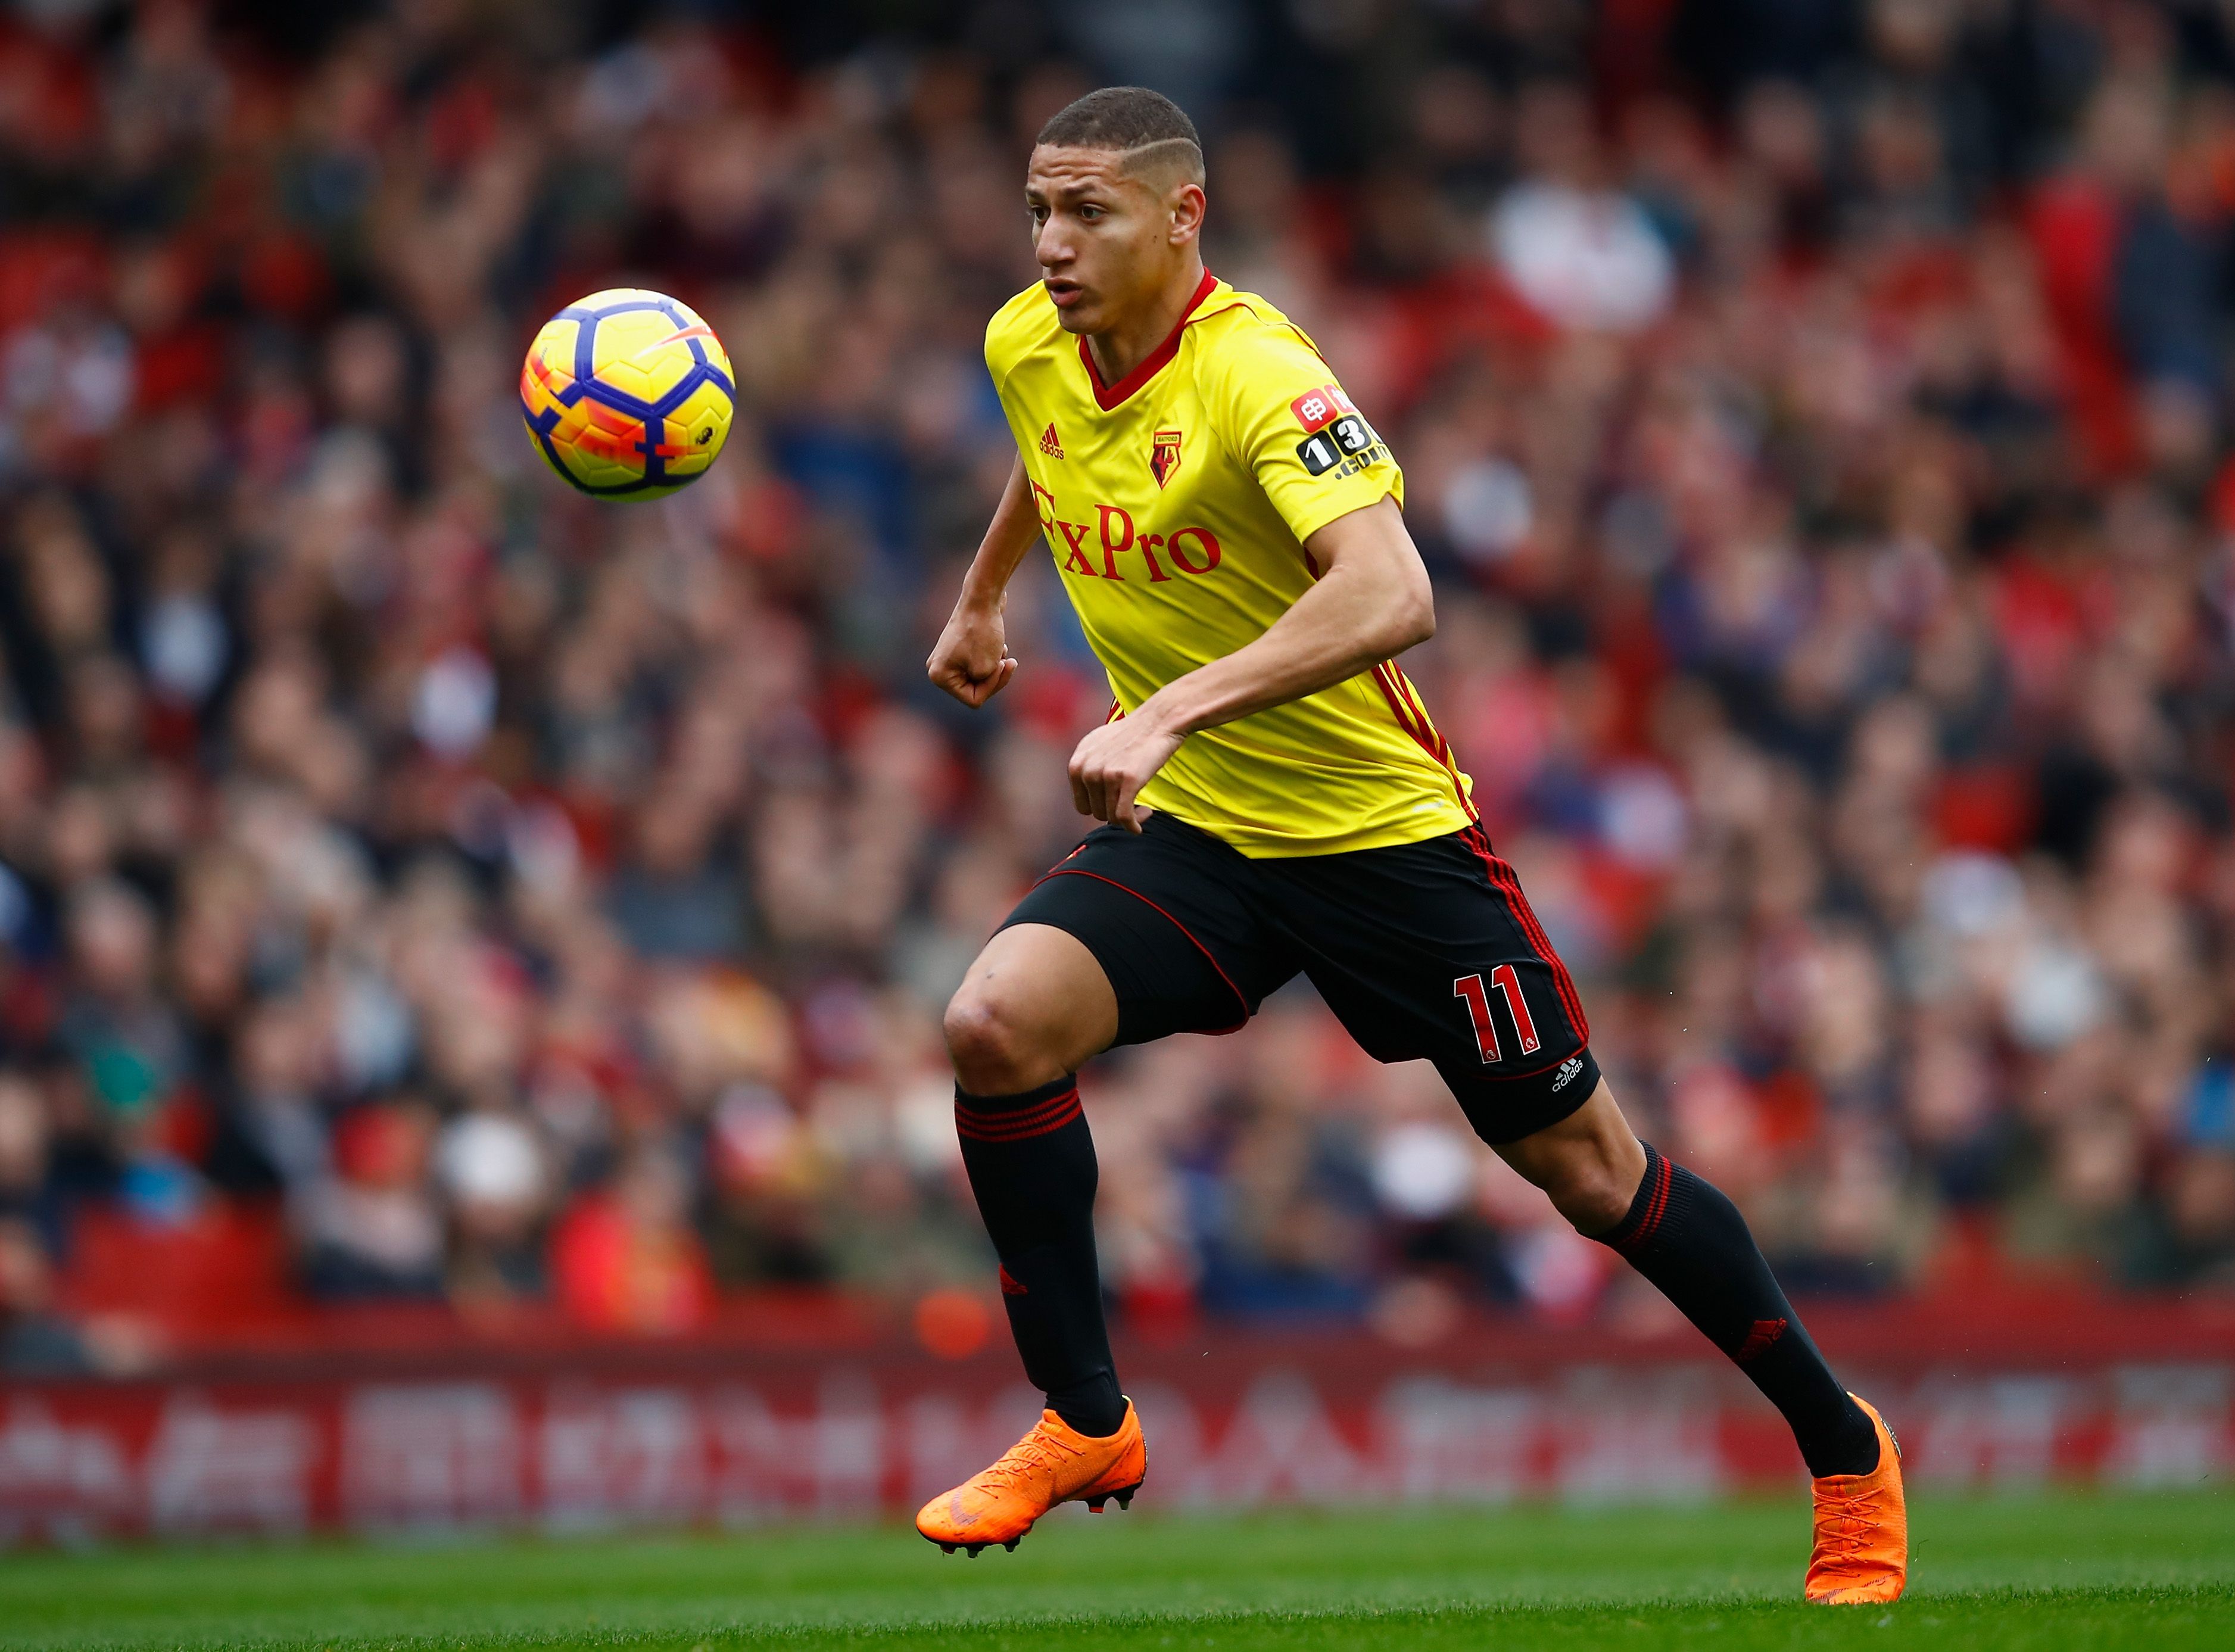 LONDON, ENGLAND - MARCH 11:  Richarlison of Watford in action during the Premier League match between Arsenal and Watford at Emirates Stadium on March 11, 2018 in London, England.  (Photo by Julian Finney/Getty Images)